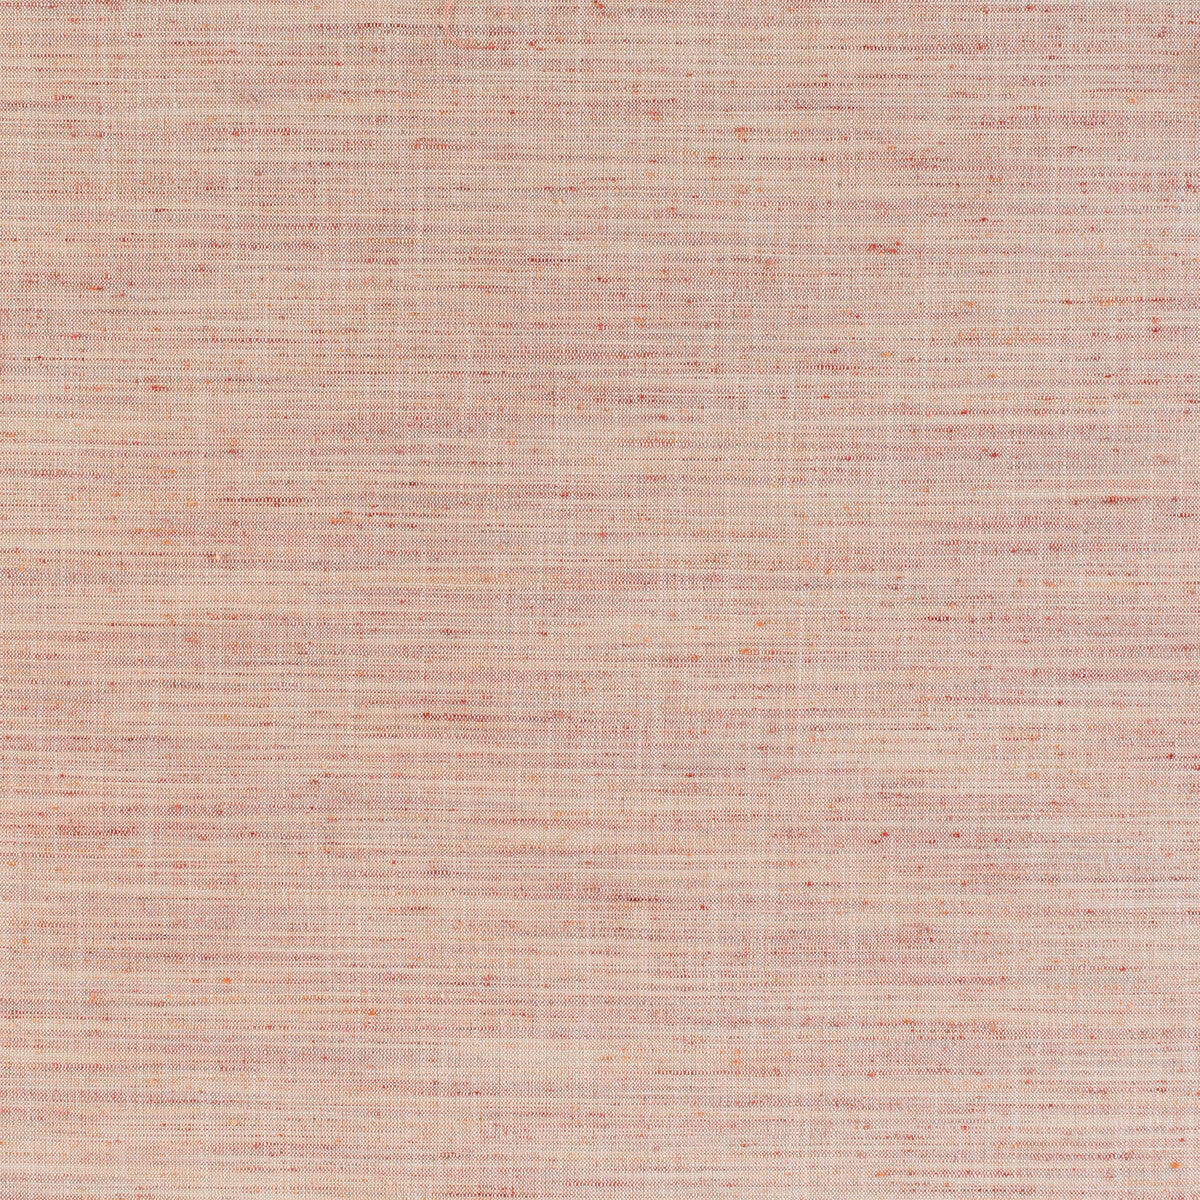 Groundcover fabric in blush color - pattern 35911.12.0 - by Kravet Design in the Barbara Barry Home Midsummer collection